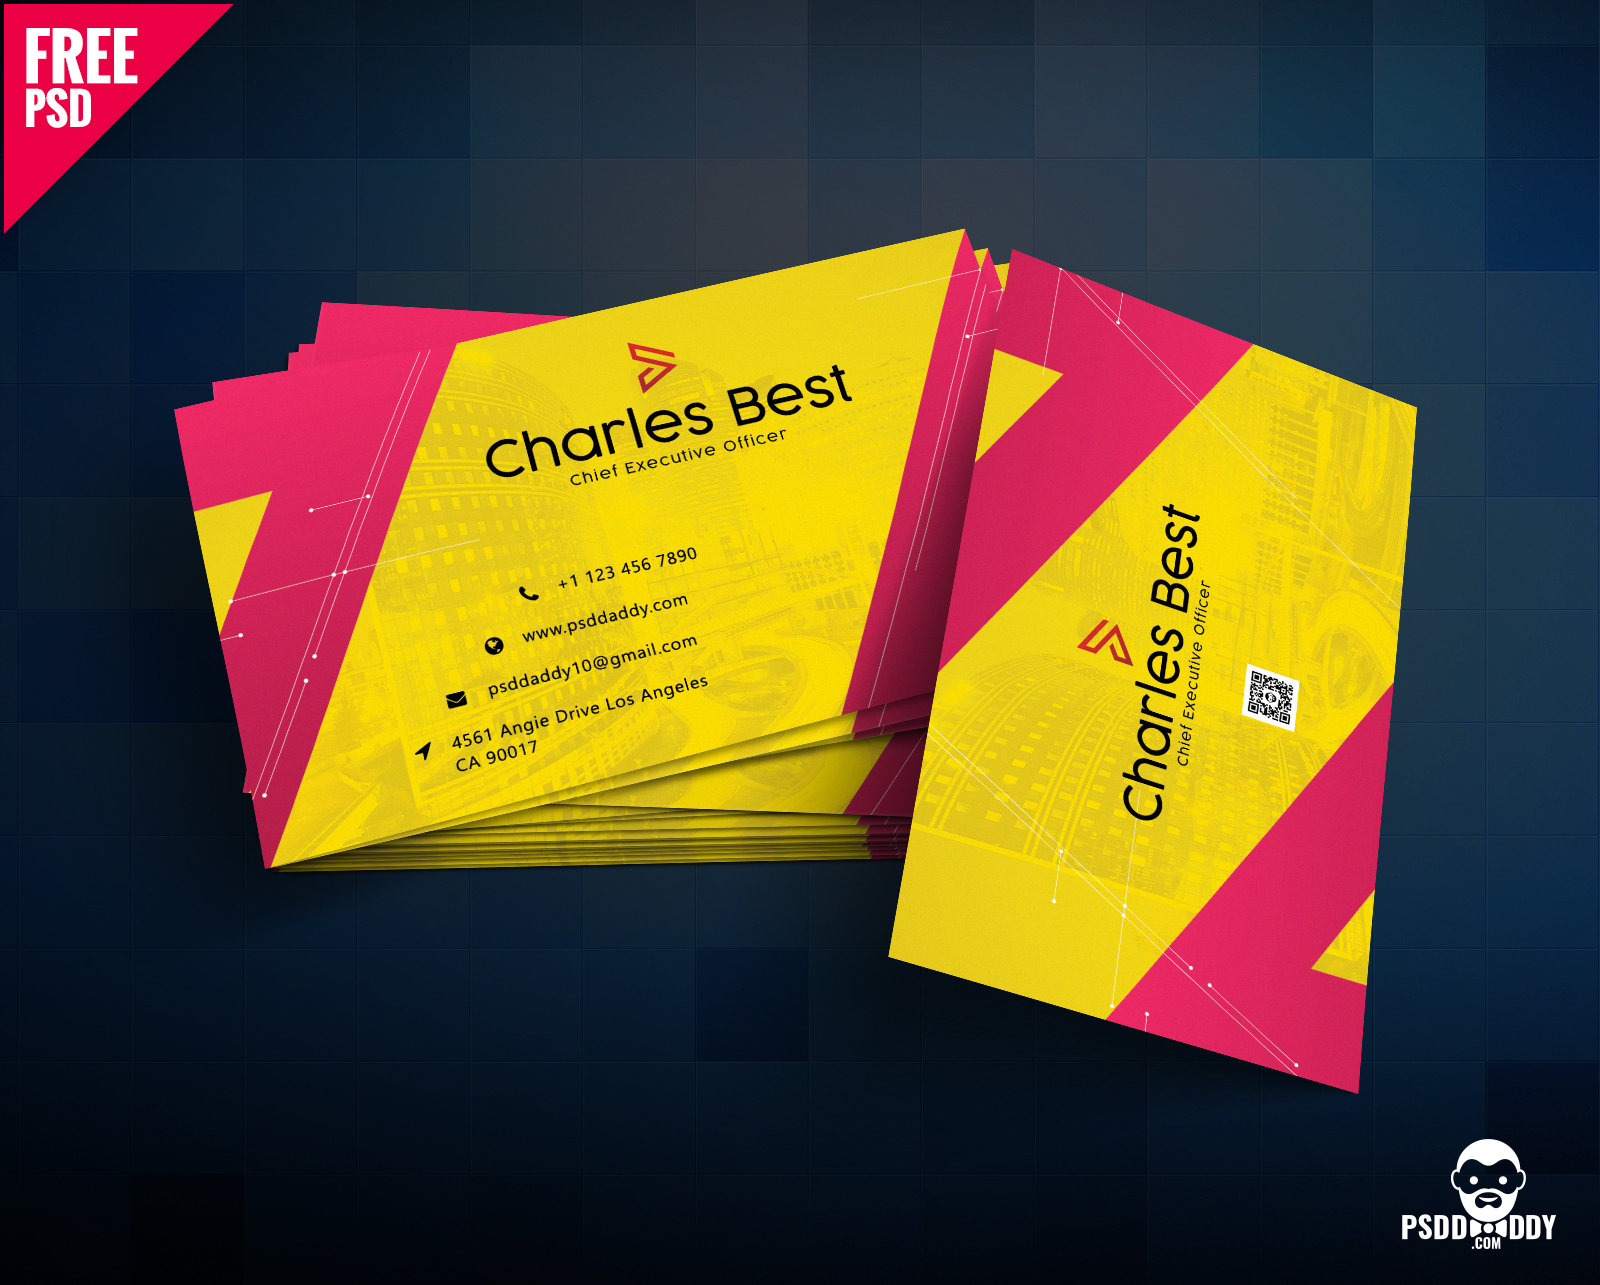 Download] Creative Business Card Free Psd | Psddaddy With Regard To Creative Business Card Templates Psd